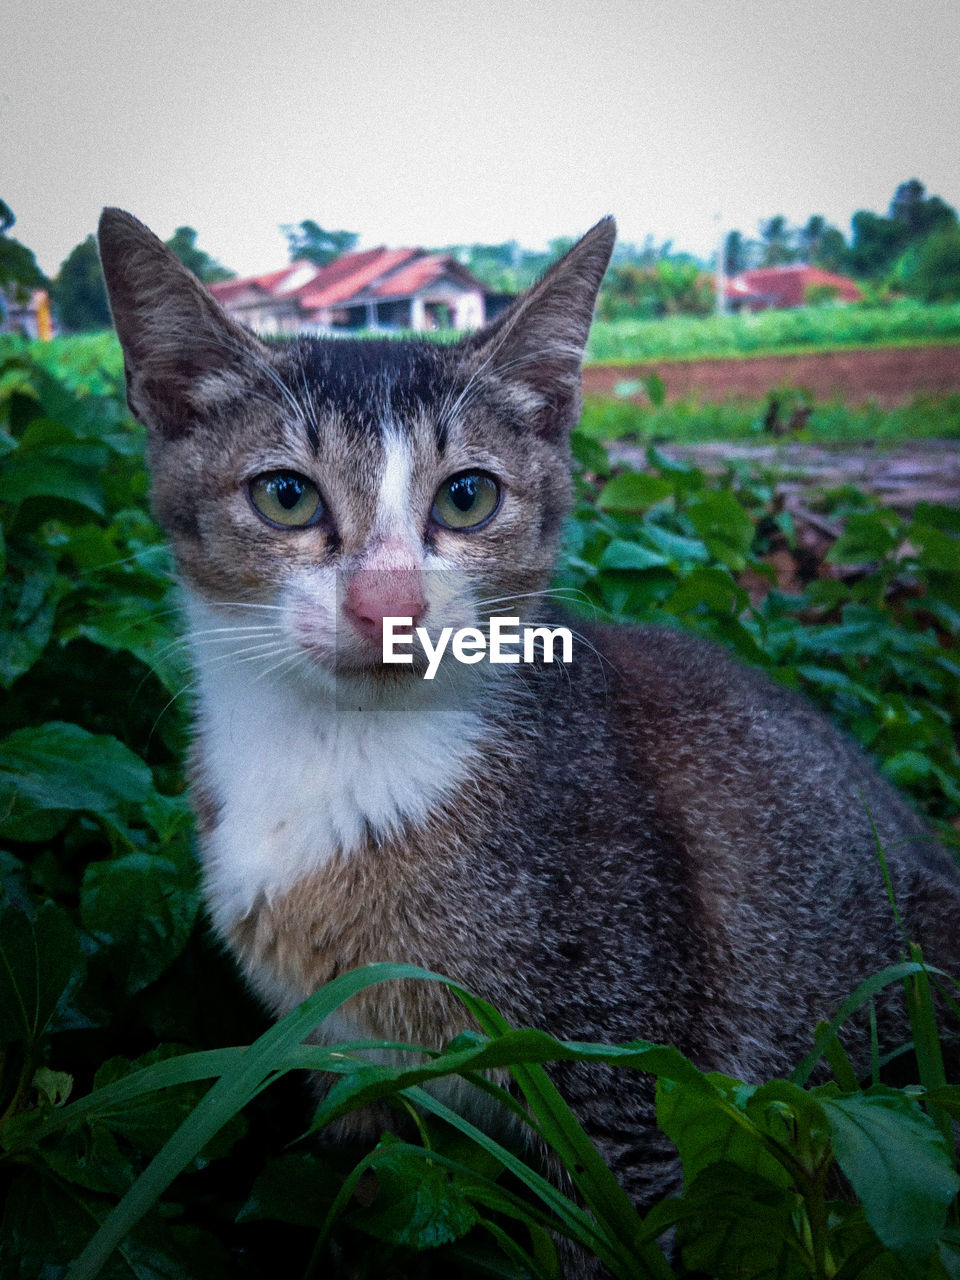 cat, animal themes, pet, animal, mammal, domestic animals, domestic cat, one animal, feline, portrait, looking at camera, green, plant, small to medium-sized cats, felidae, whiskers, grass, no people, nature, carnivore, leaf, plant part, animal body part